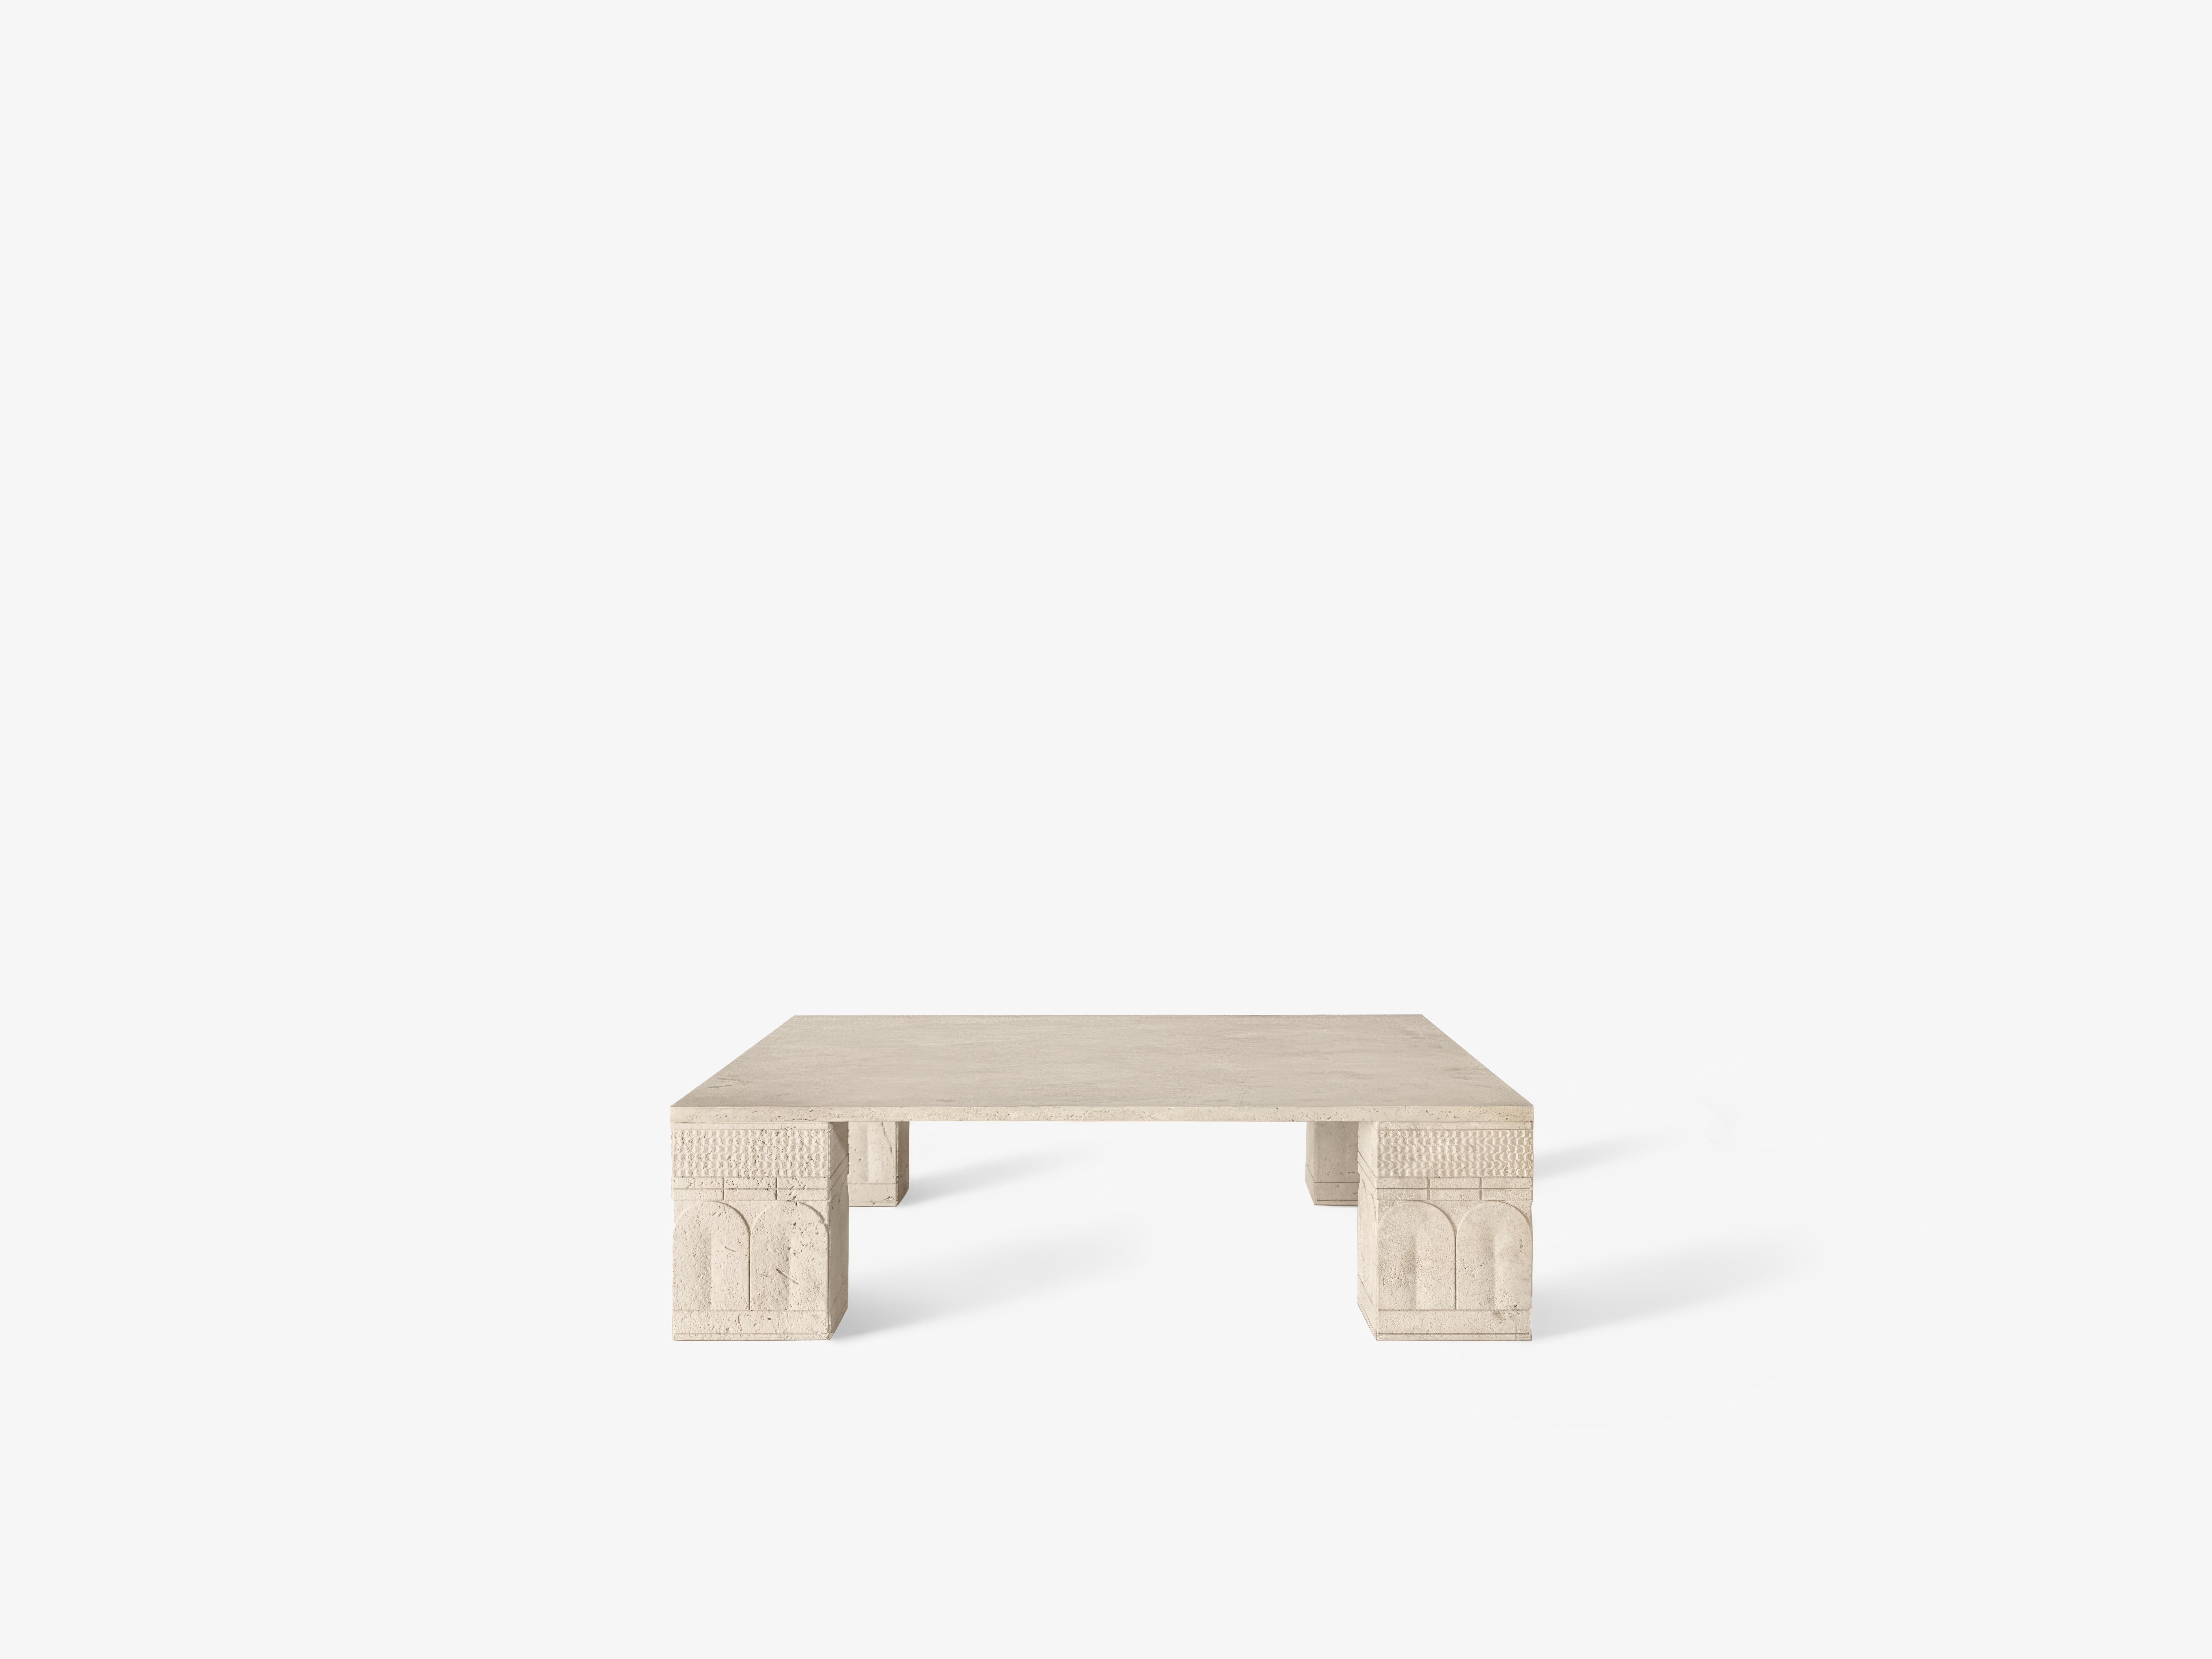 Landin Coffee Table by OHLA STUDIO
Dimensions: D 110 x W 110 x H 30 cm 
Materials: Travertine de Veracruz.
130 kg

This collection draws upon the earliest known works of representational art. From crude symbols painstakingly chipped into cave walls,